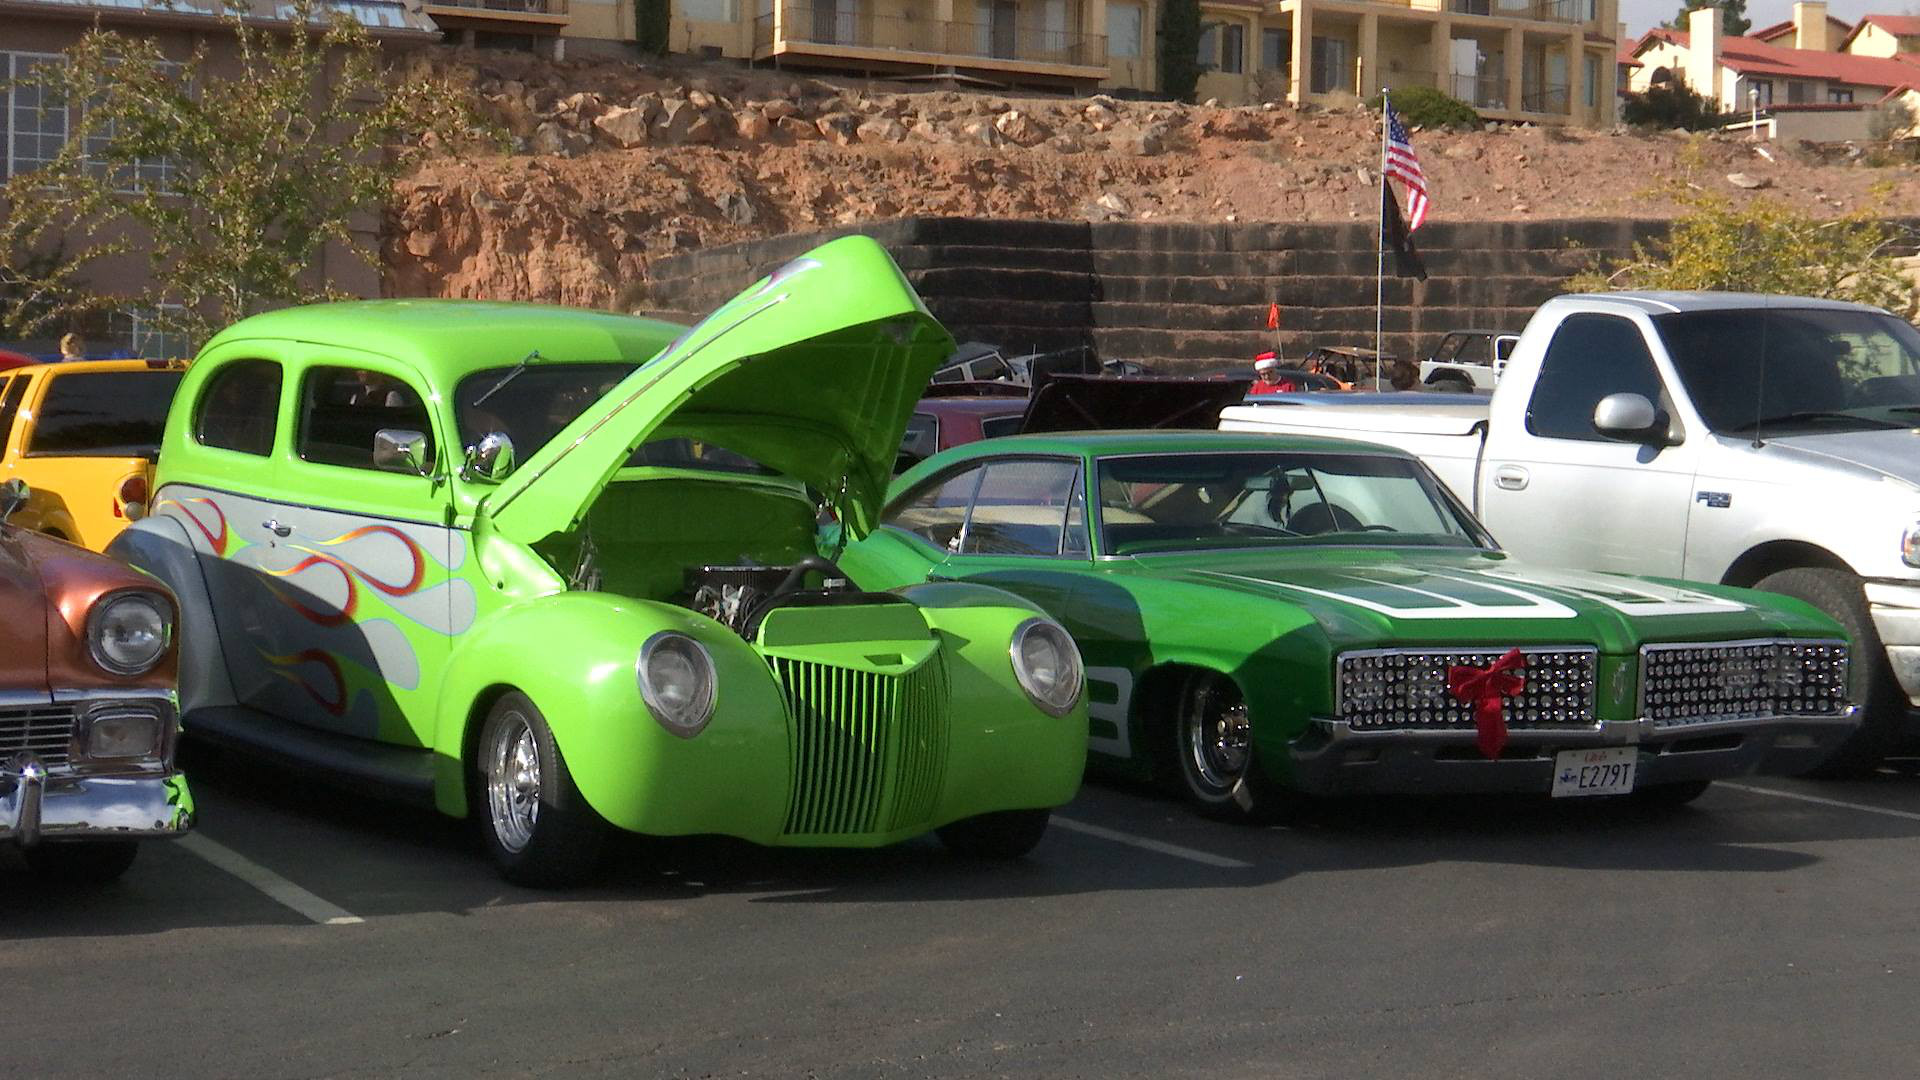 11th Annual Toys For Tots Car Show